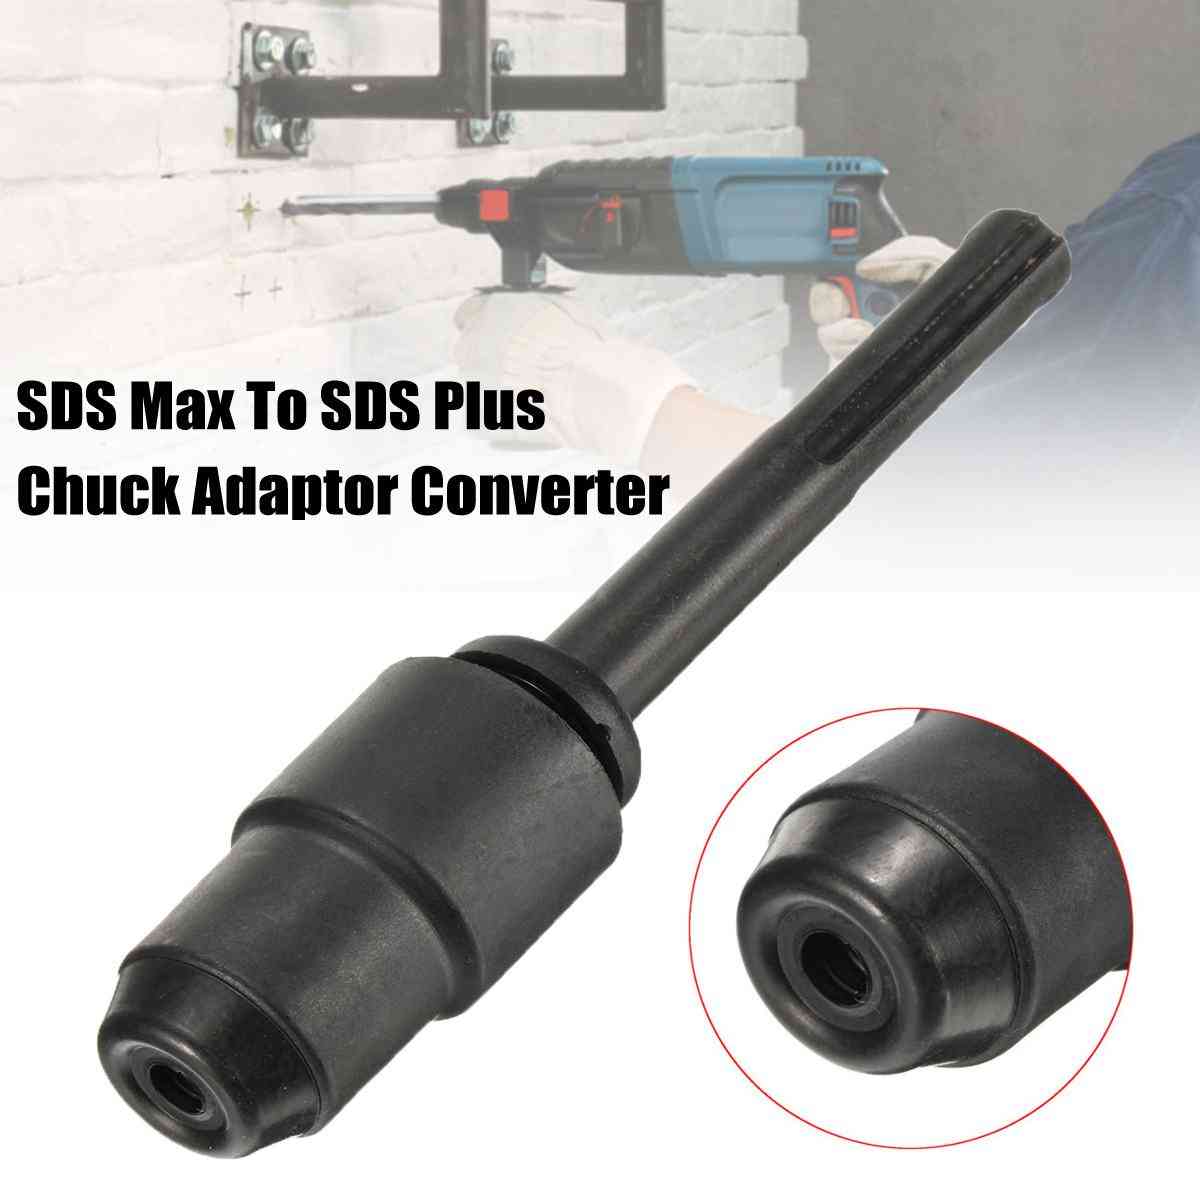 Sds Max To Sds Plus Adaptor, Chuck Drill Converter, Shank Quick Tool